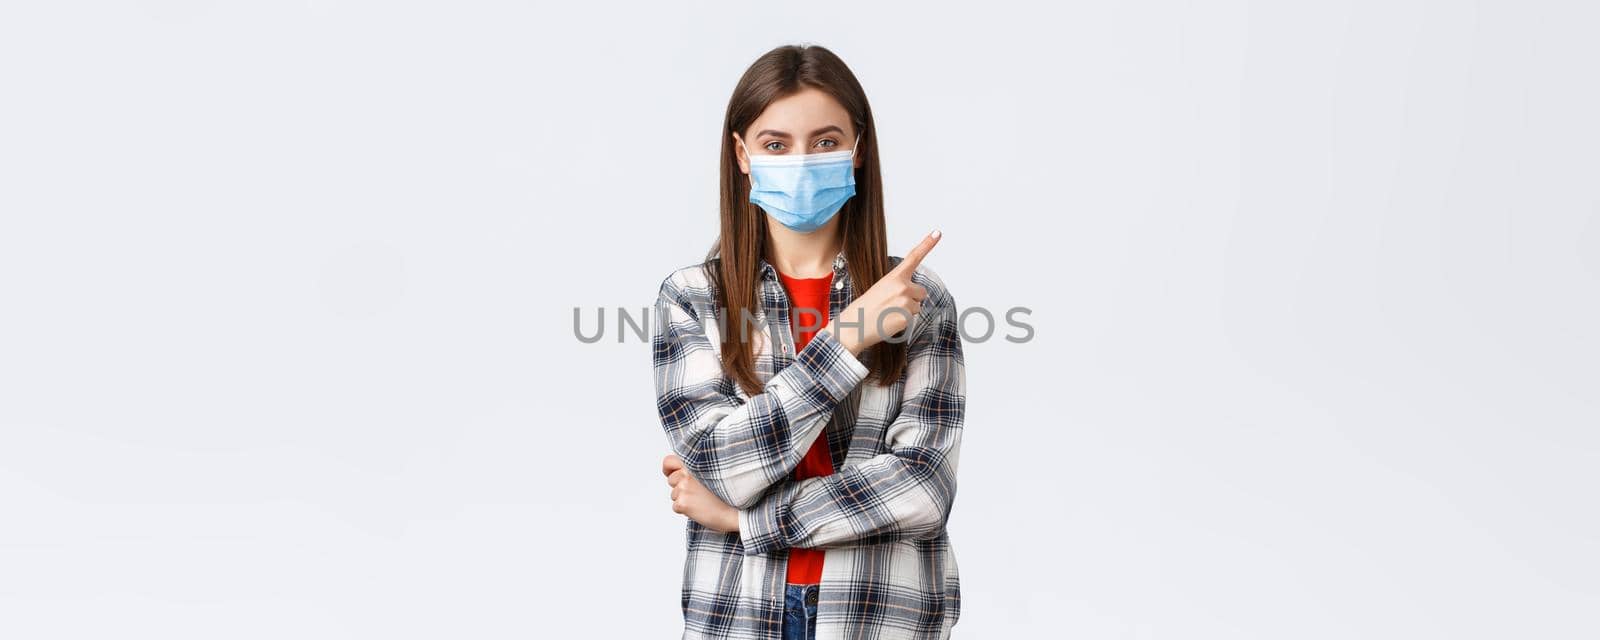 Coronavirus outbreak, leisure on quarantine, social distancing and emotions concept. Happy smiling young woman in medical mask provide information on covid-19 pointing finger upper right.